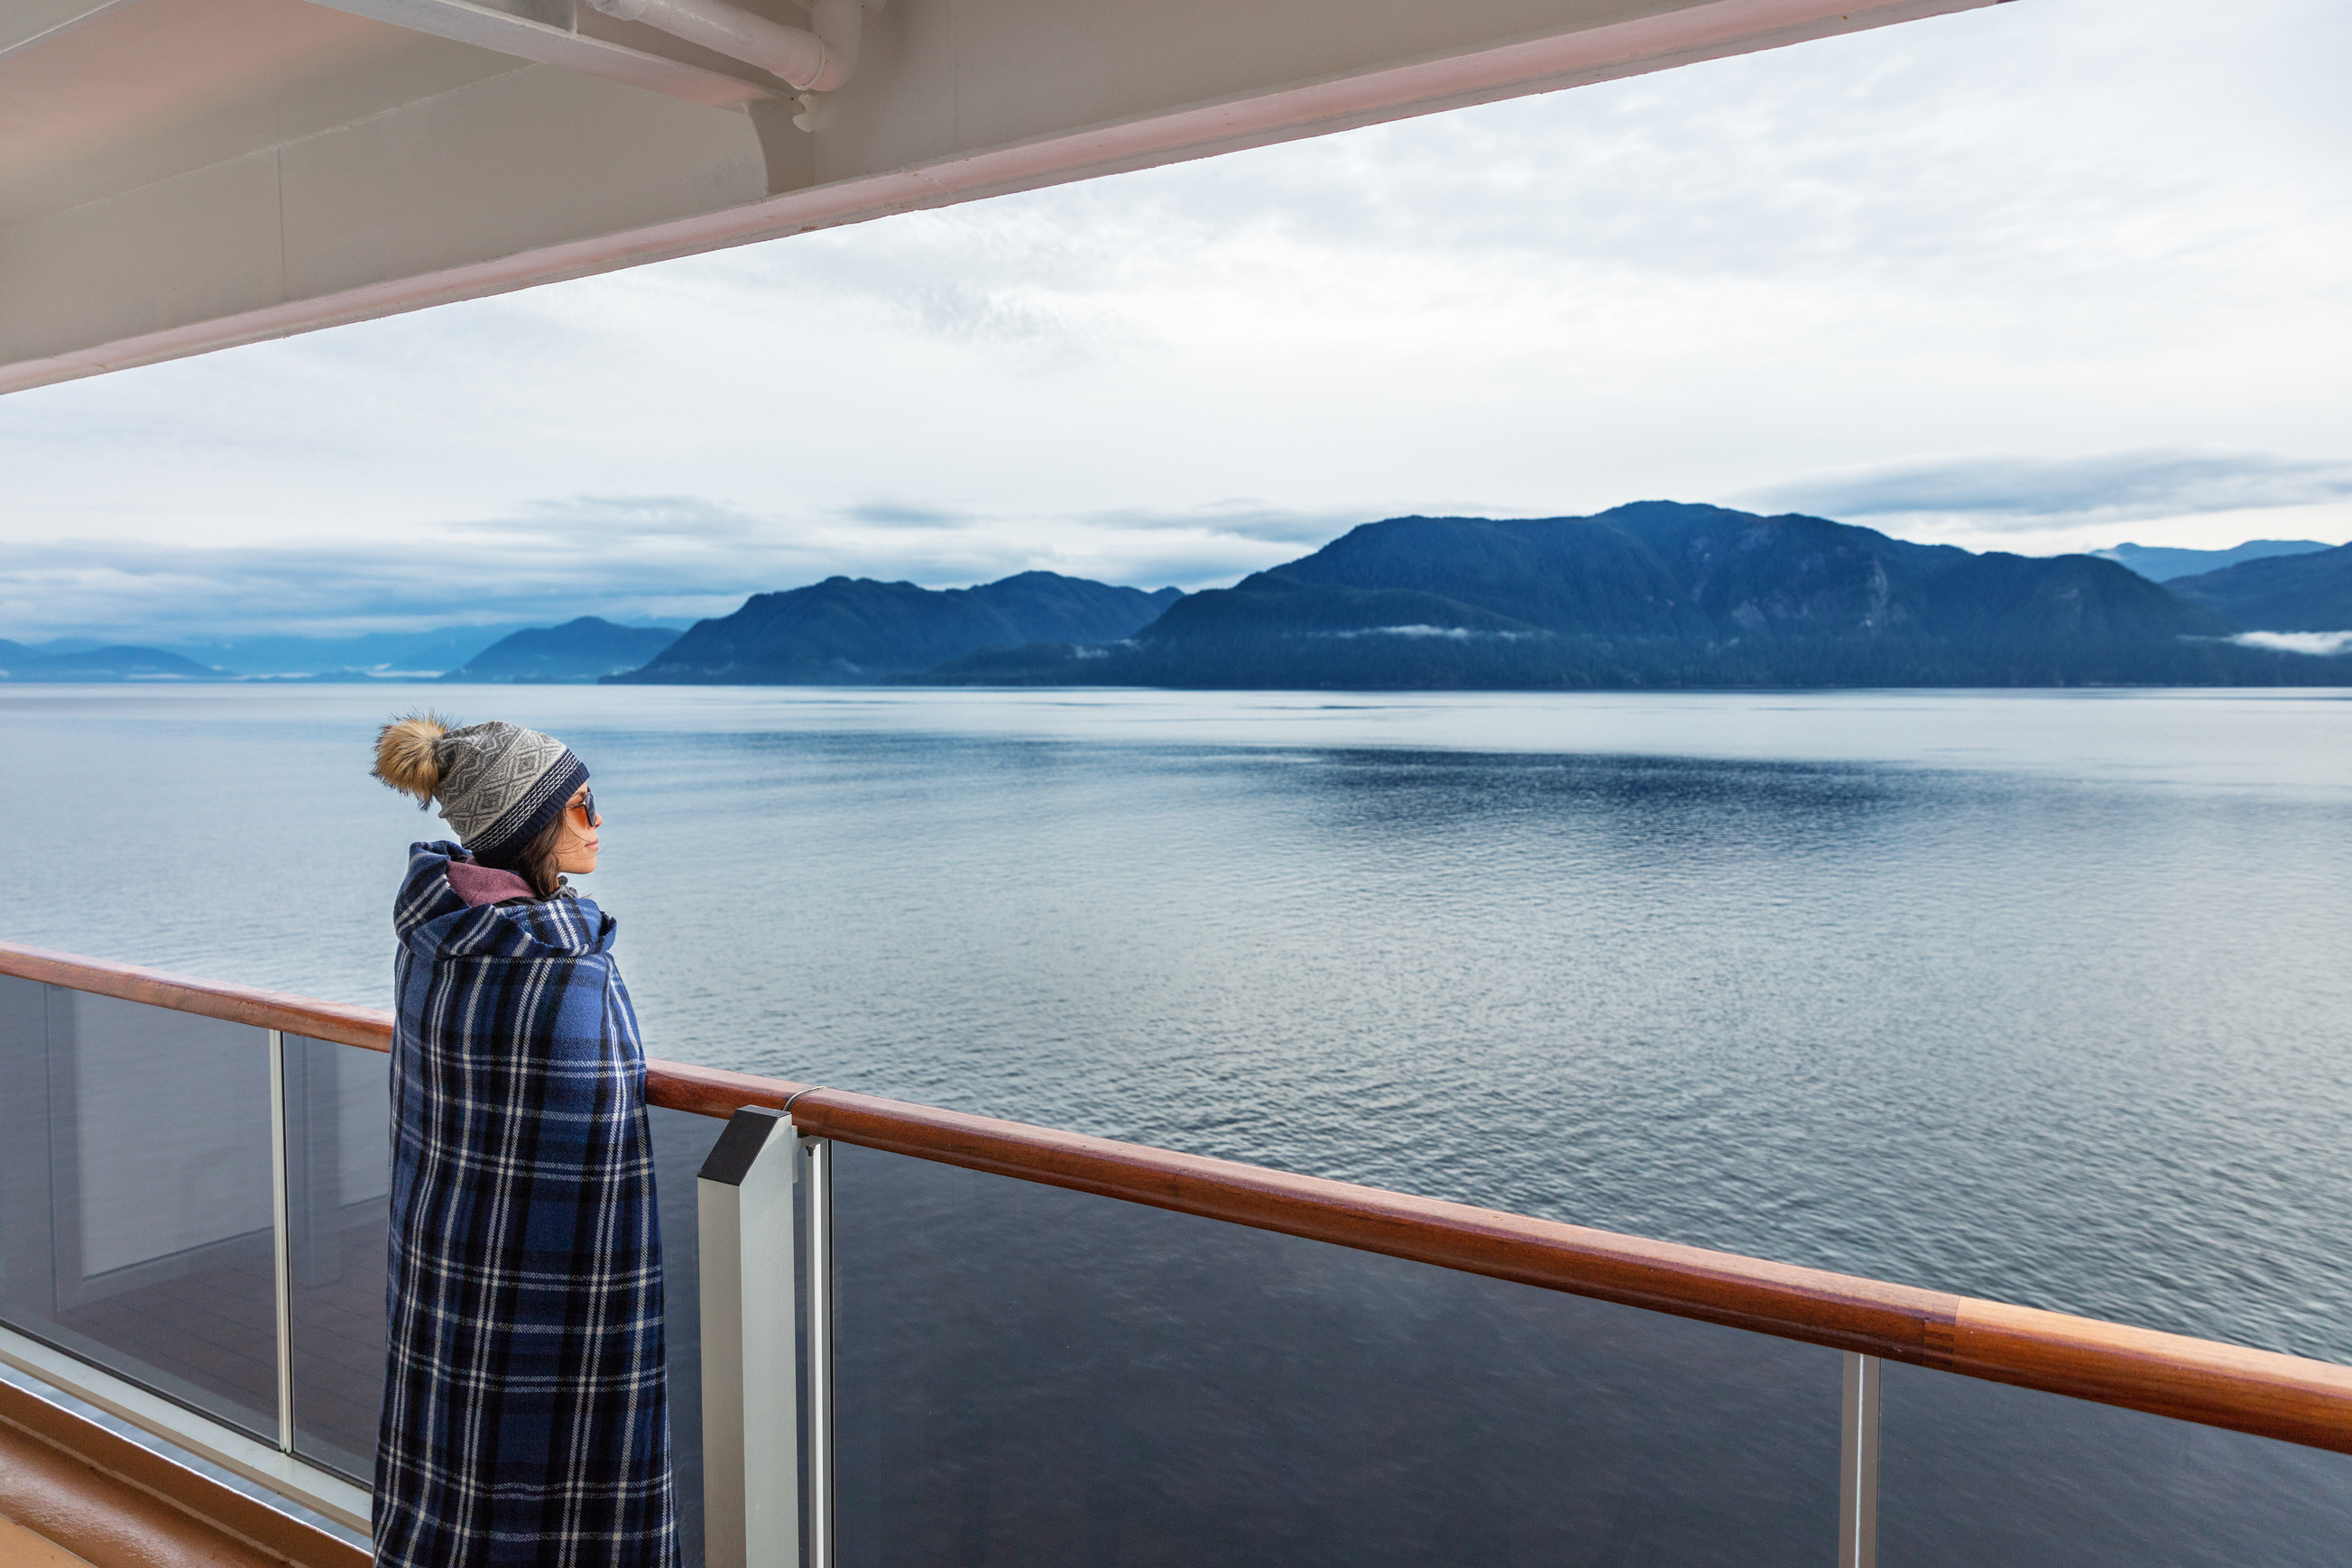 Alaska Cruise Travel Luxury Vacation Woman Watching inside Passage Scenic Cruising Day on Balcony Deck Enjoying View of Mountains and Nature Landscape. Asian Girl Tourist with Wool Blanket.